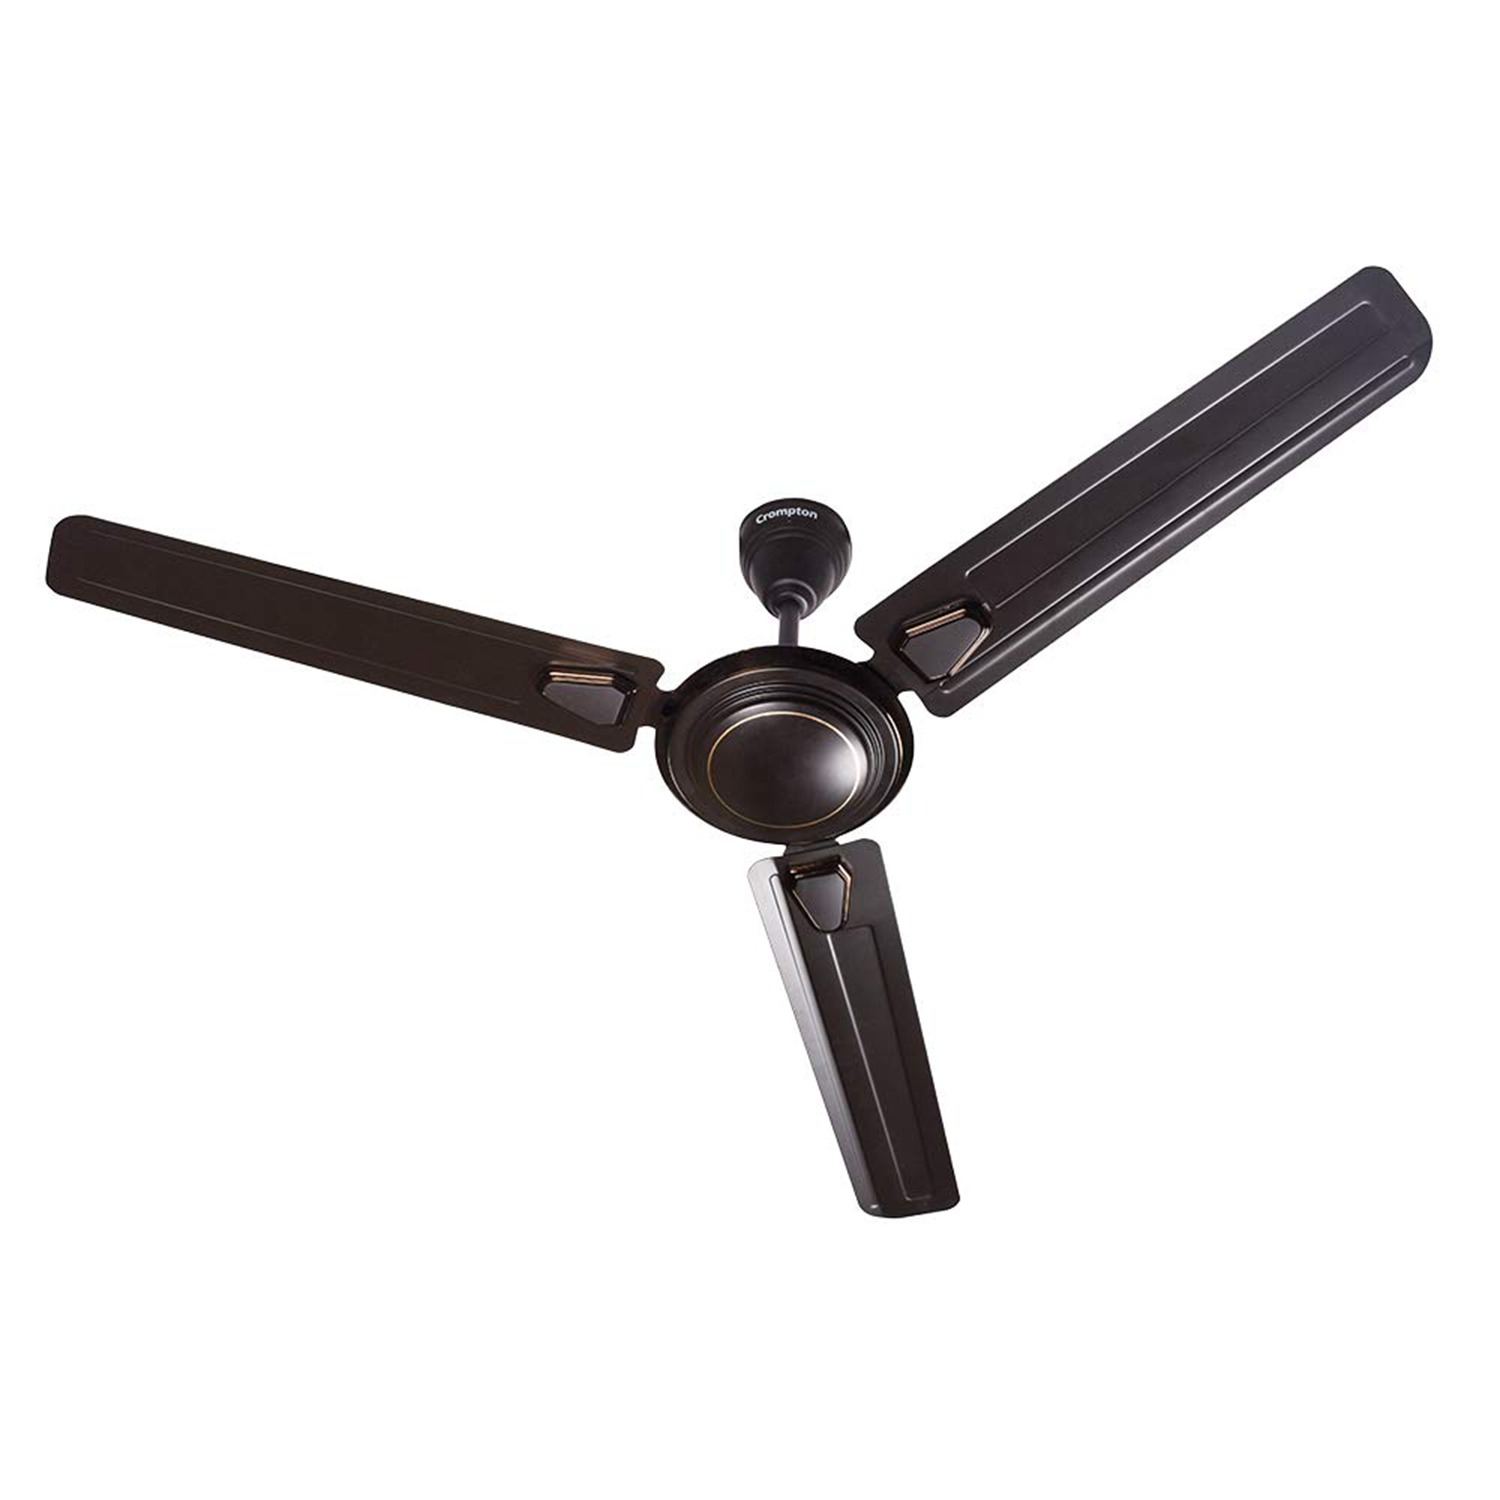 Crompton Super Briz Deco 1200 mm (48 inch) High Speed Decorative Ceiling Fan (Smoked Brown) - Brown